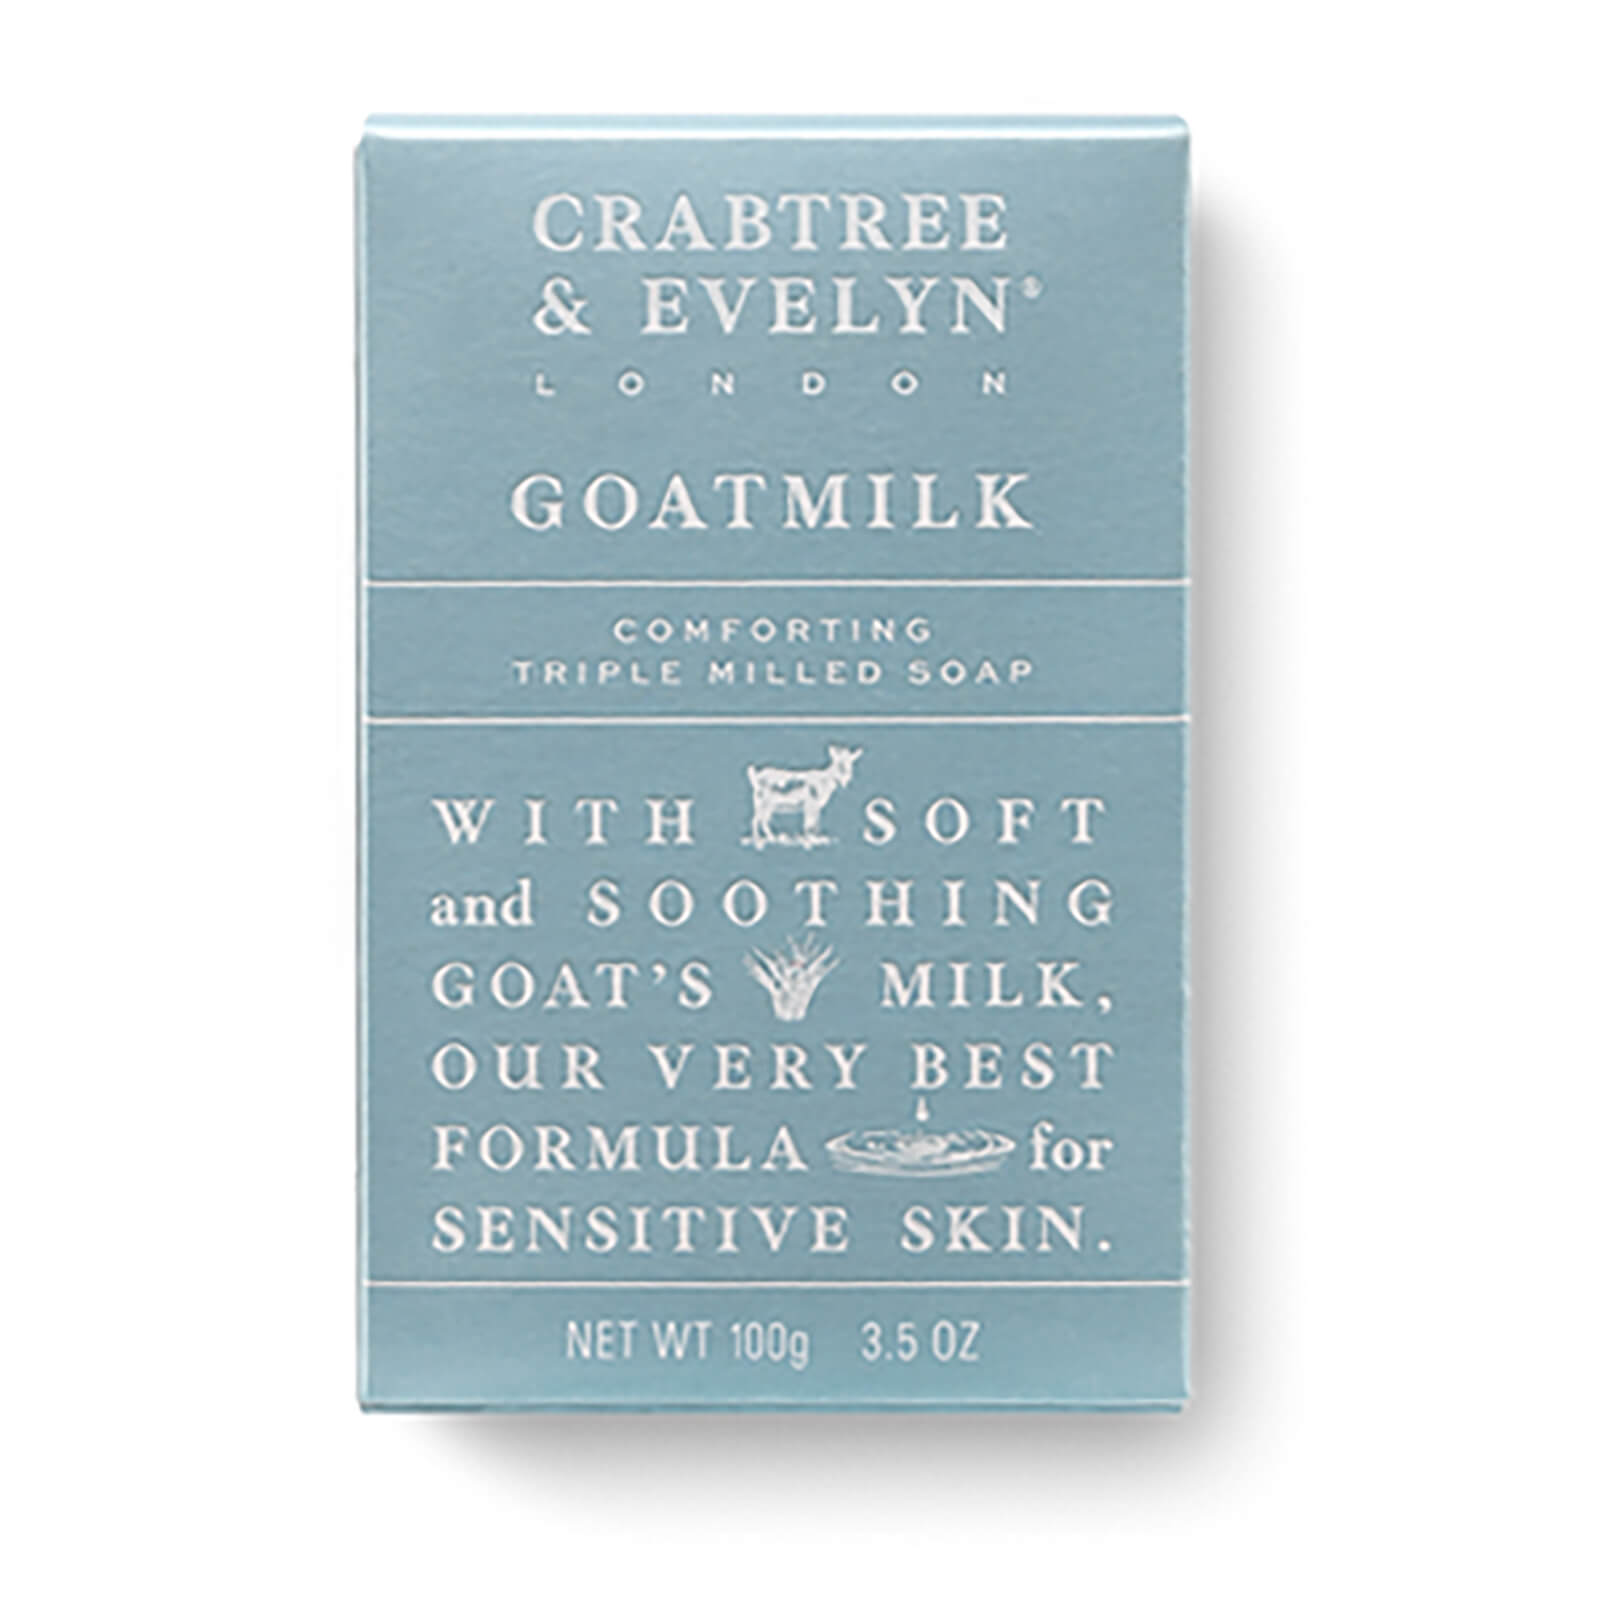 Crabtree & Evelyn Goatmilk and Oat Comforting Triple Milled Soap 100g